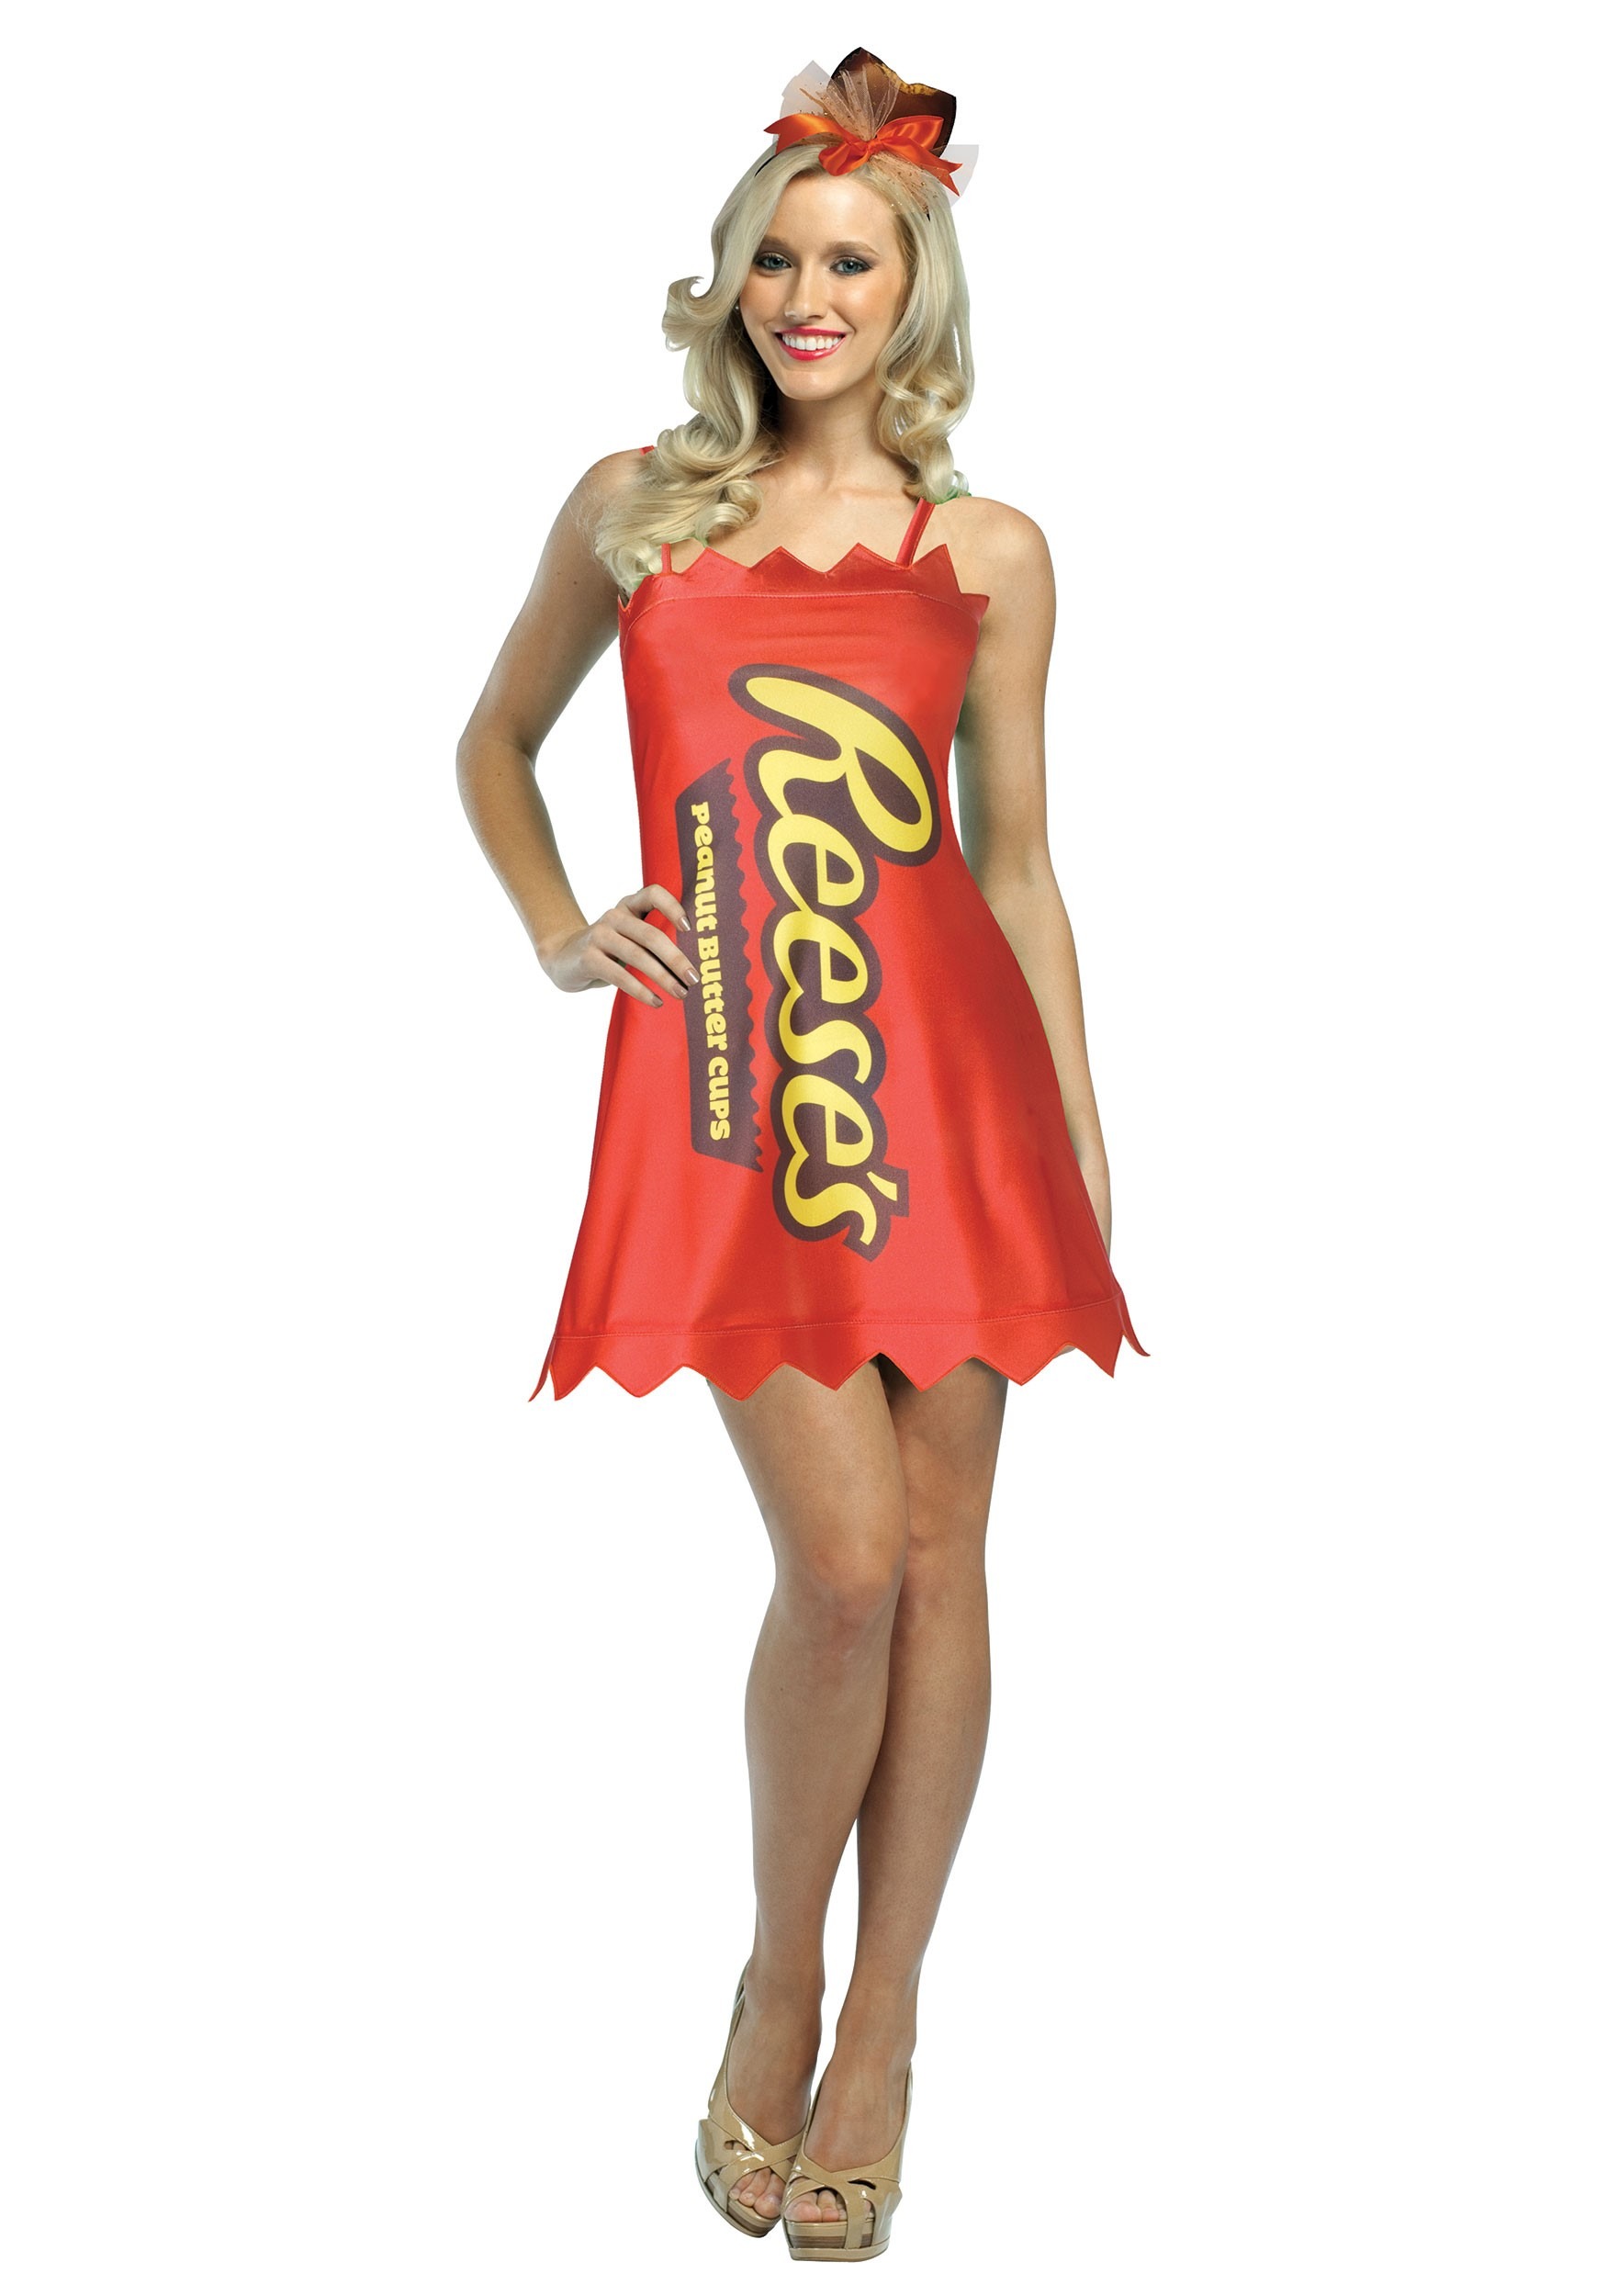 Reese’s Womens Reese’s Cup Costume